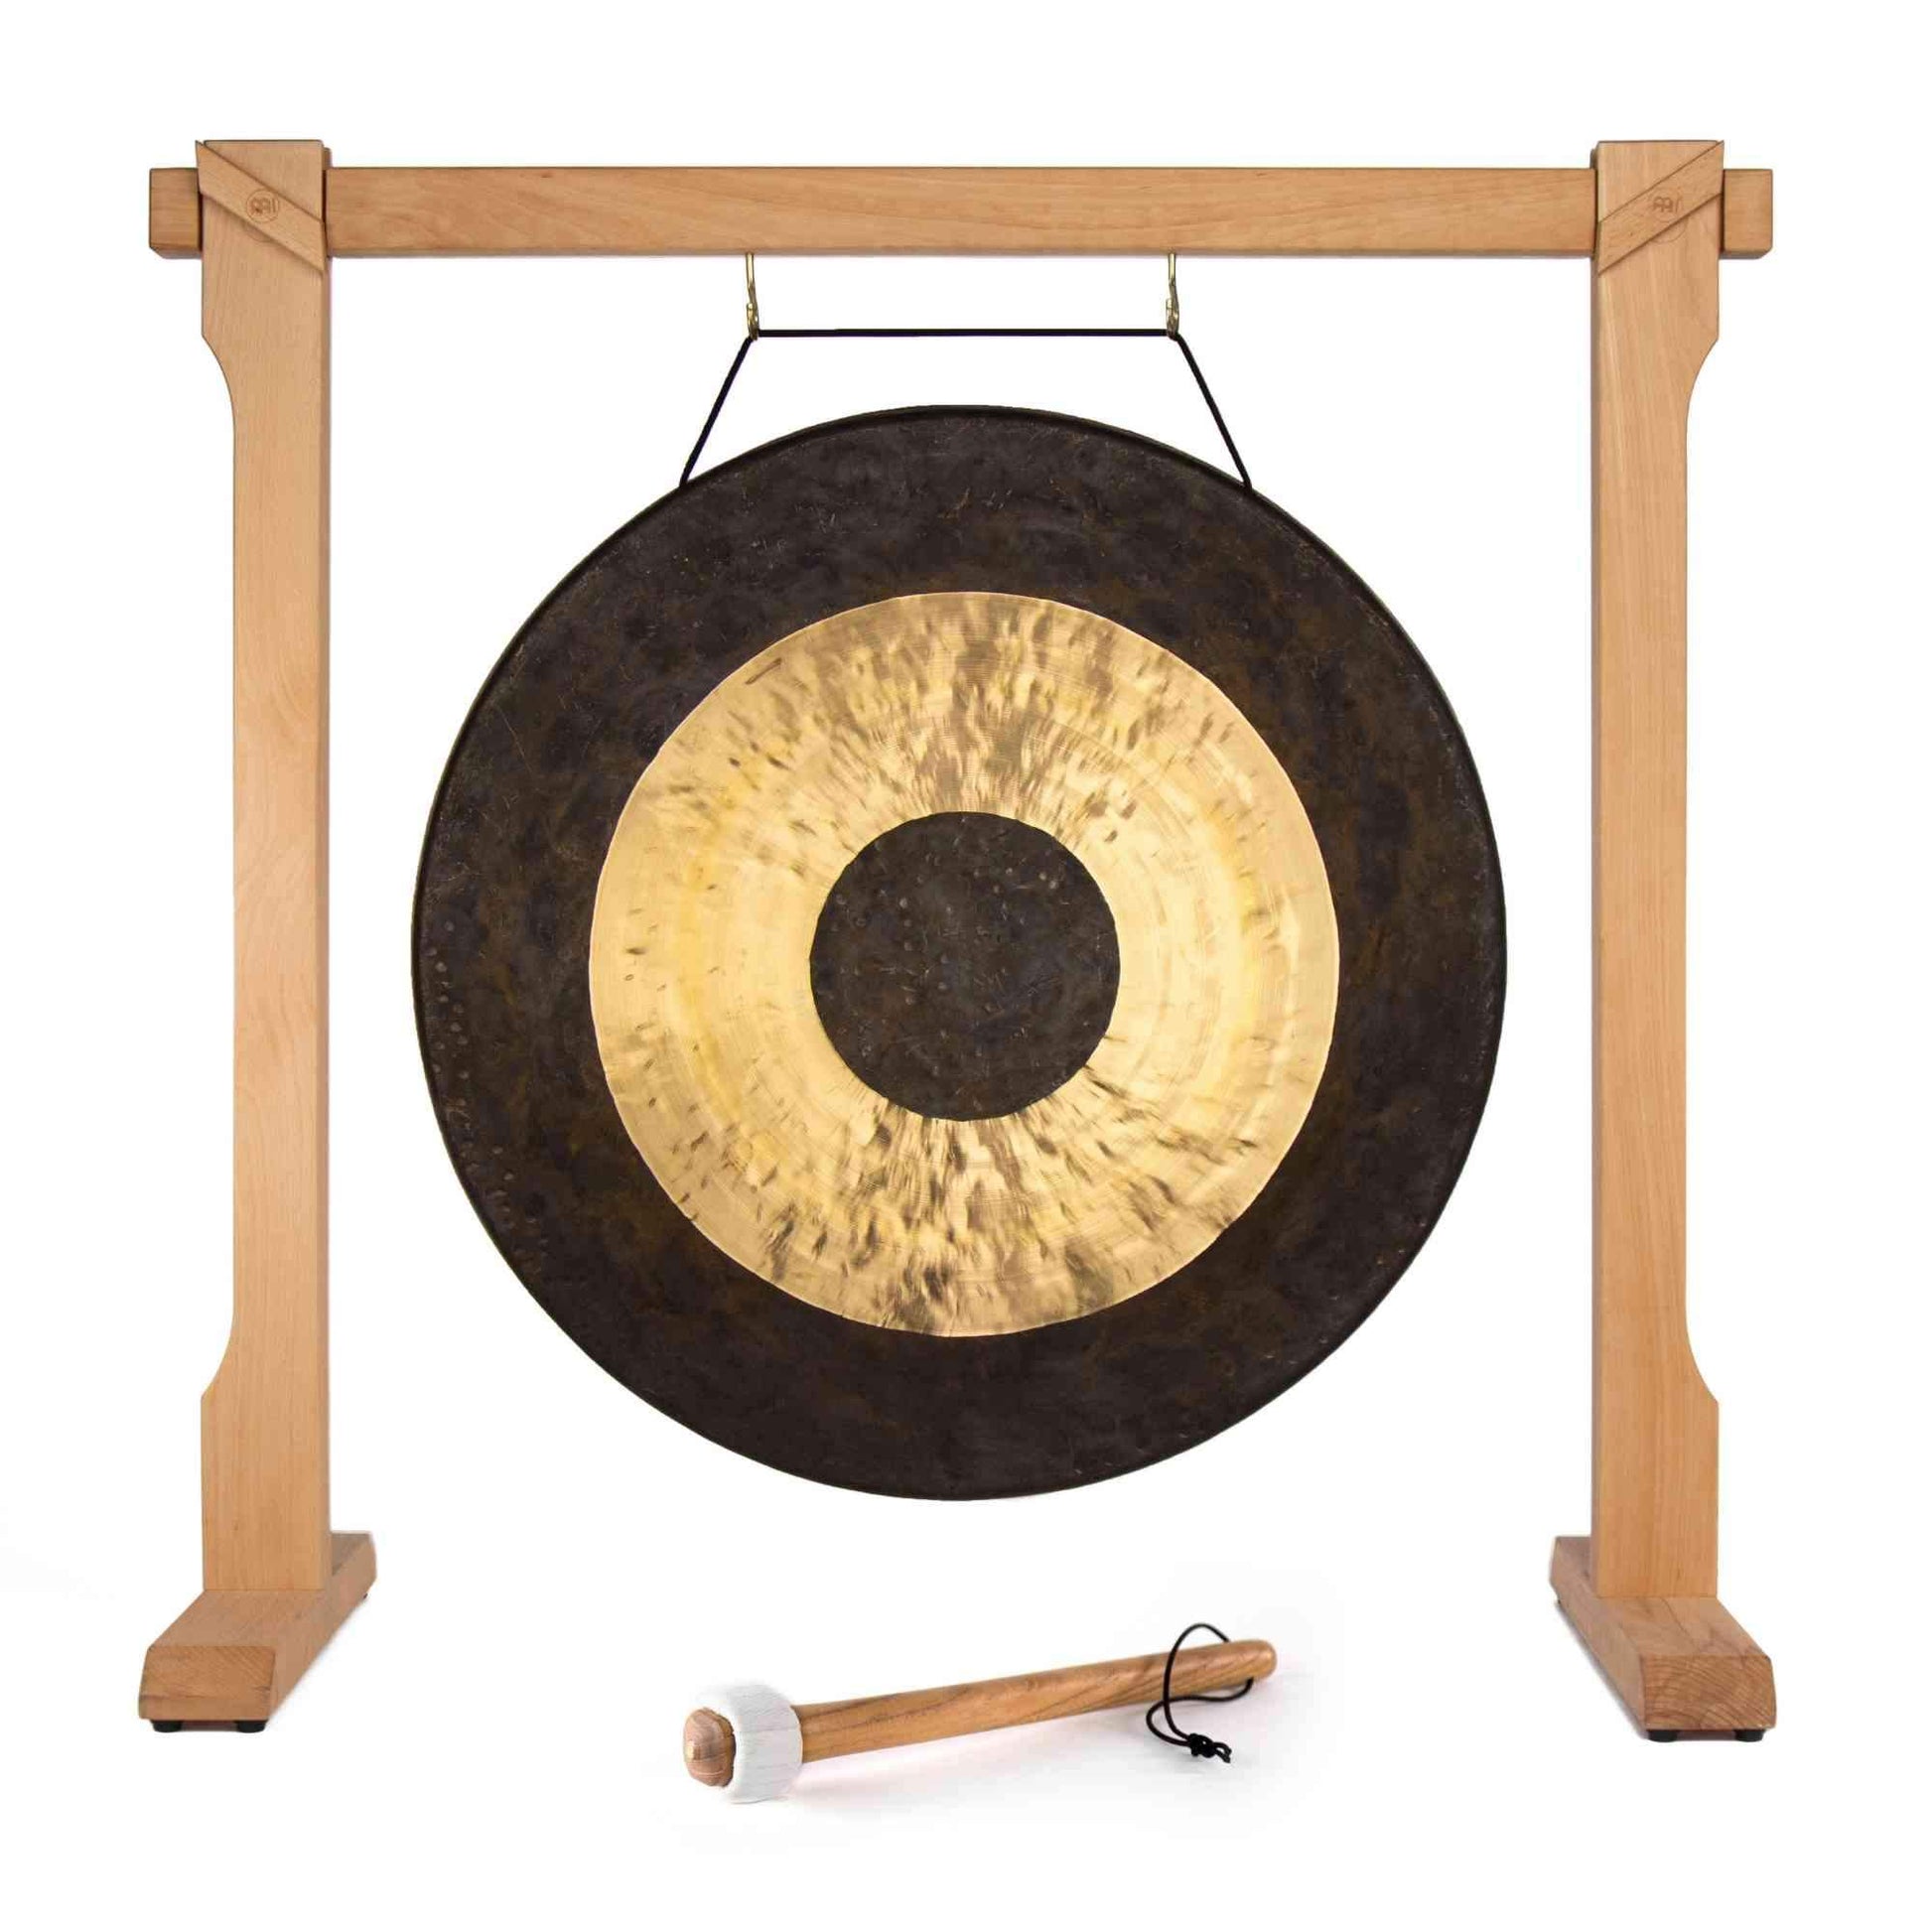 The Gong Shop Chinese Gongs with Stands 34" Chau Gong on Meinl Wooden Gong Stand with Mallet